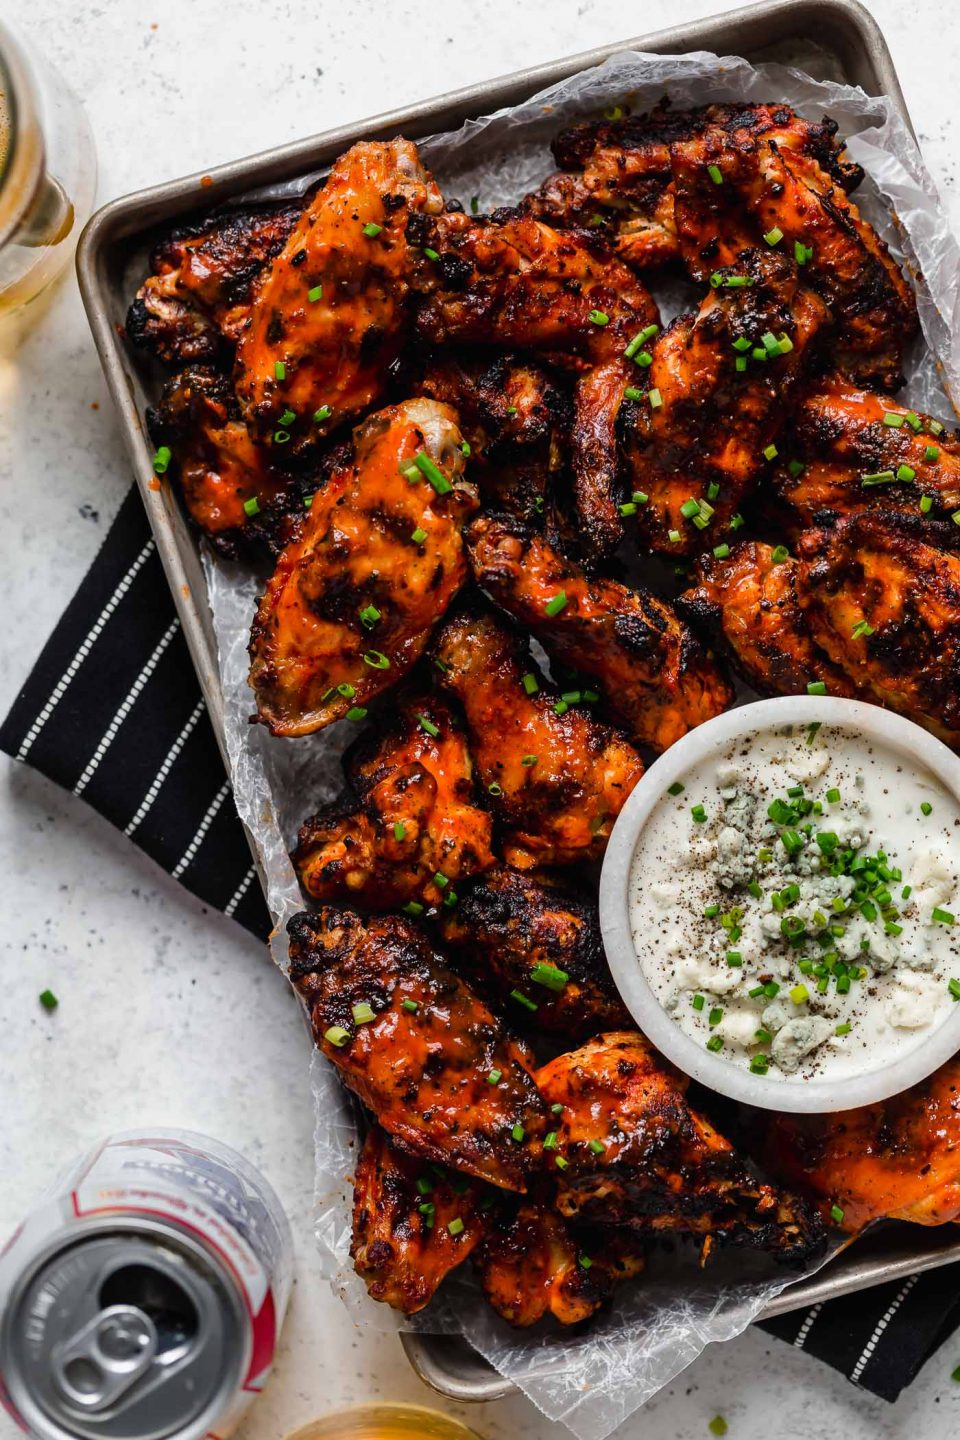 Grilled chicken wings tossed in buffalo sauce, served on a small rimmed baking sheet with bleu cheese sauce on the side.